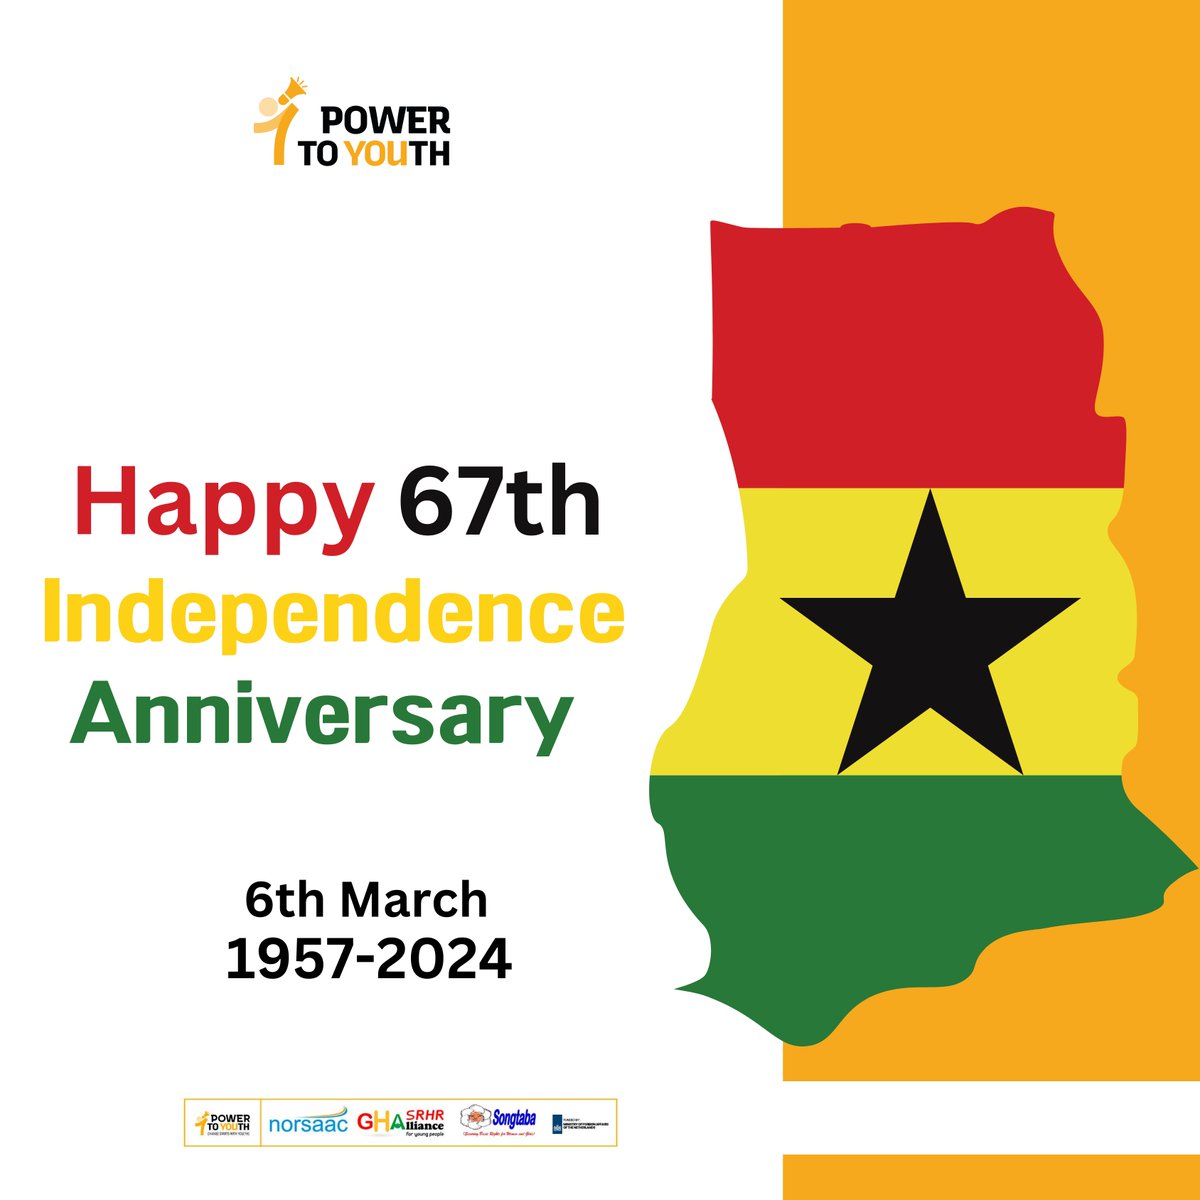 Happy 67th Independence Day to all Ghanaians. Let us persist in advocating for the inclusion of all young people in decision-making processes at every level.

#PowerToYouth #IndependenceDay